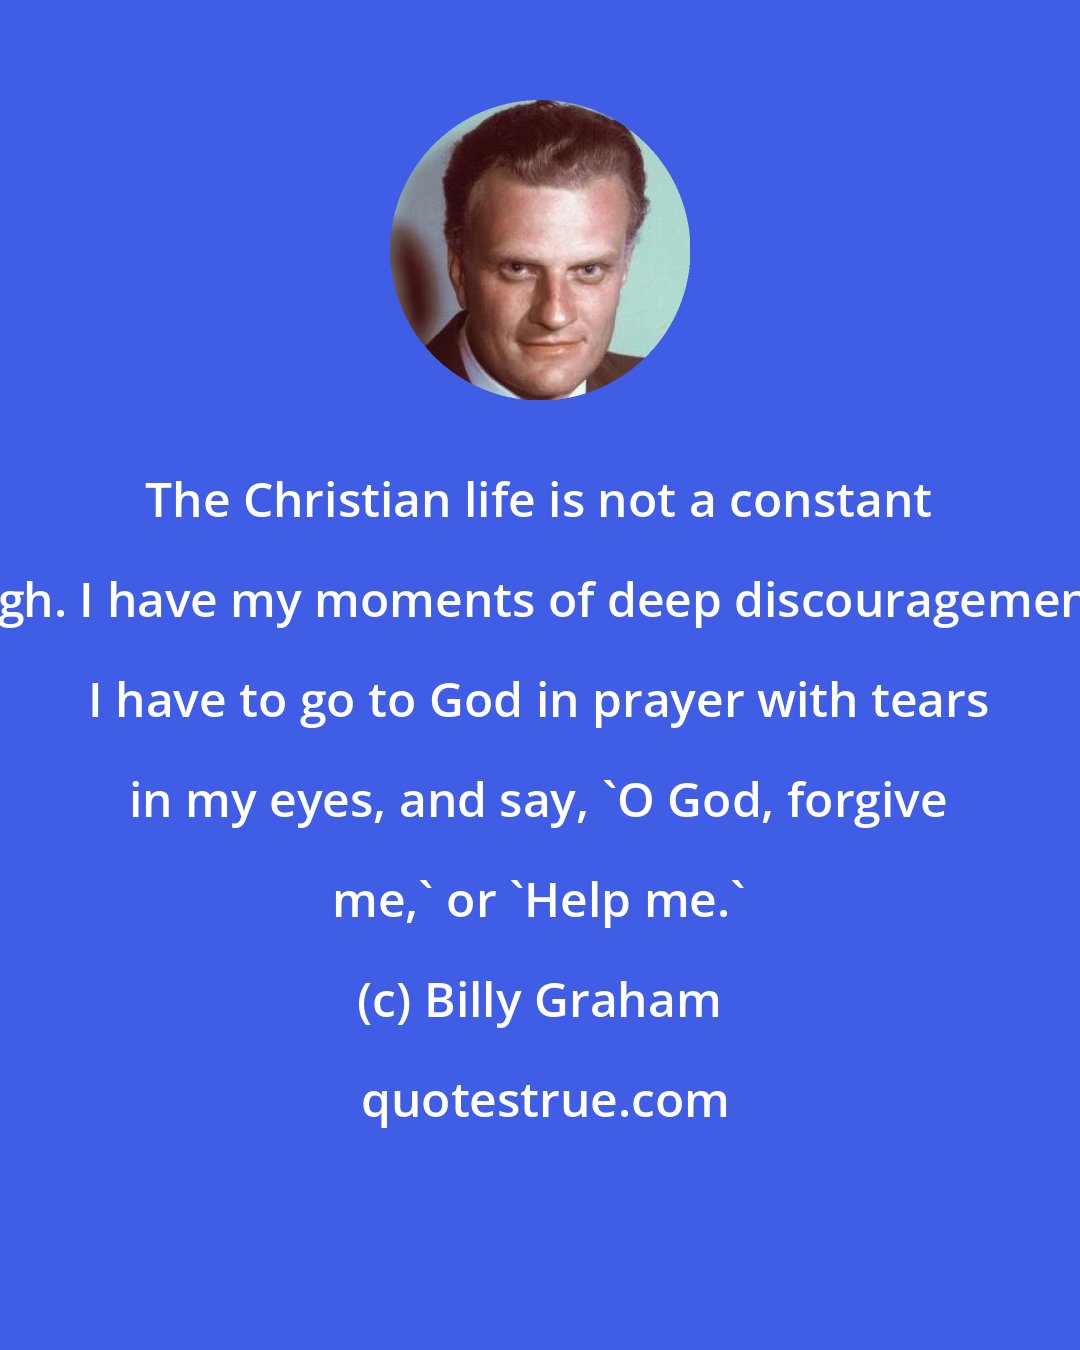 Billy Graham: The Christian life is not a constant high. I have my moments of deep discouragement. I have to go to God in prayer with tears in my eyes, and say, 'O God, forgive me,' or 'Help me.'